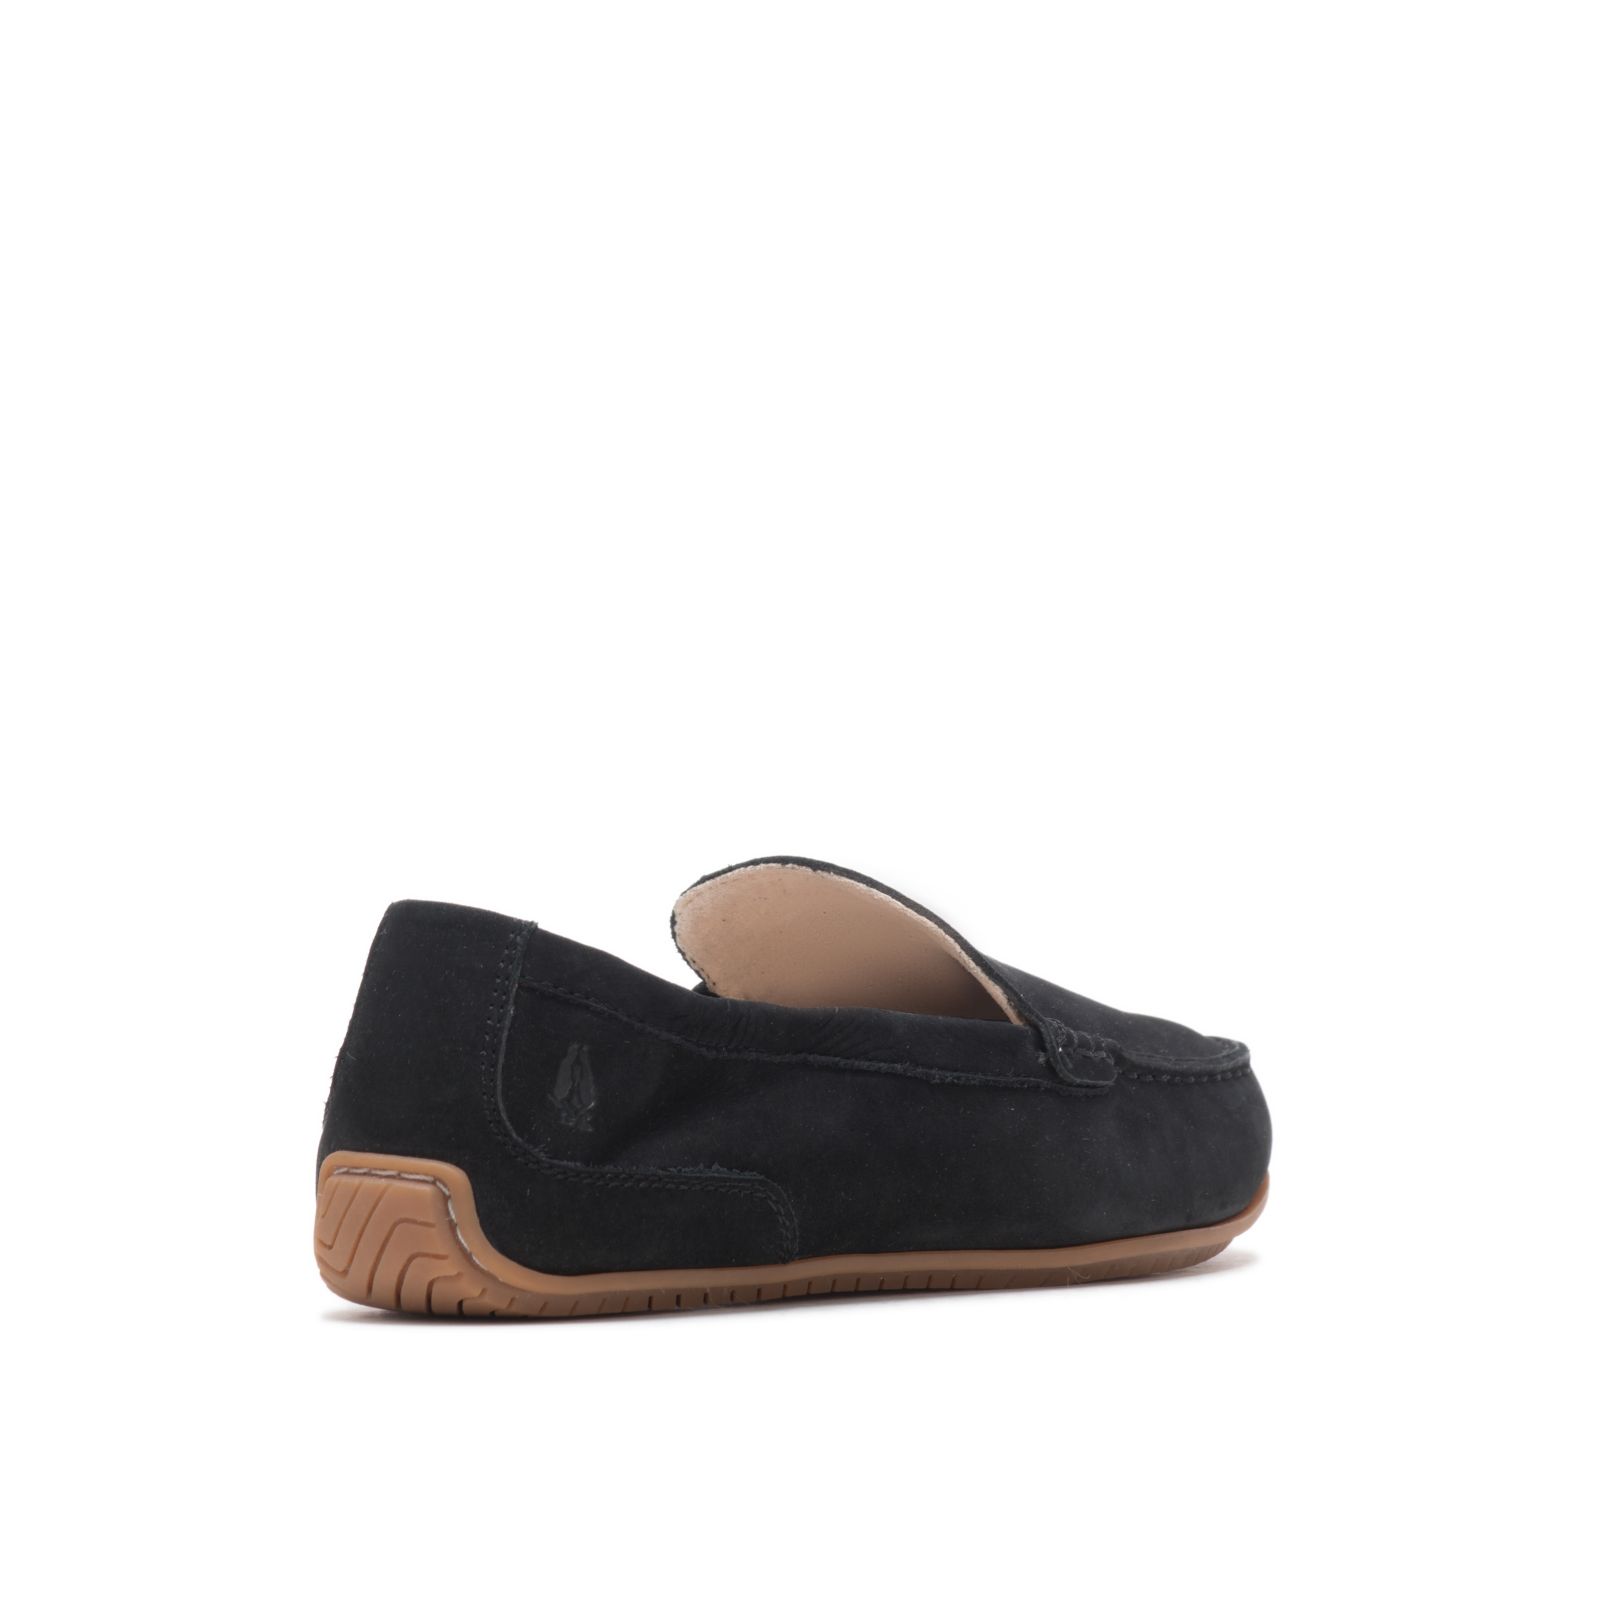 Loafers Hush Puppies Cora Mujer Negros | BXPNWUT-19